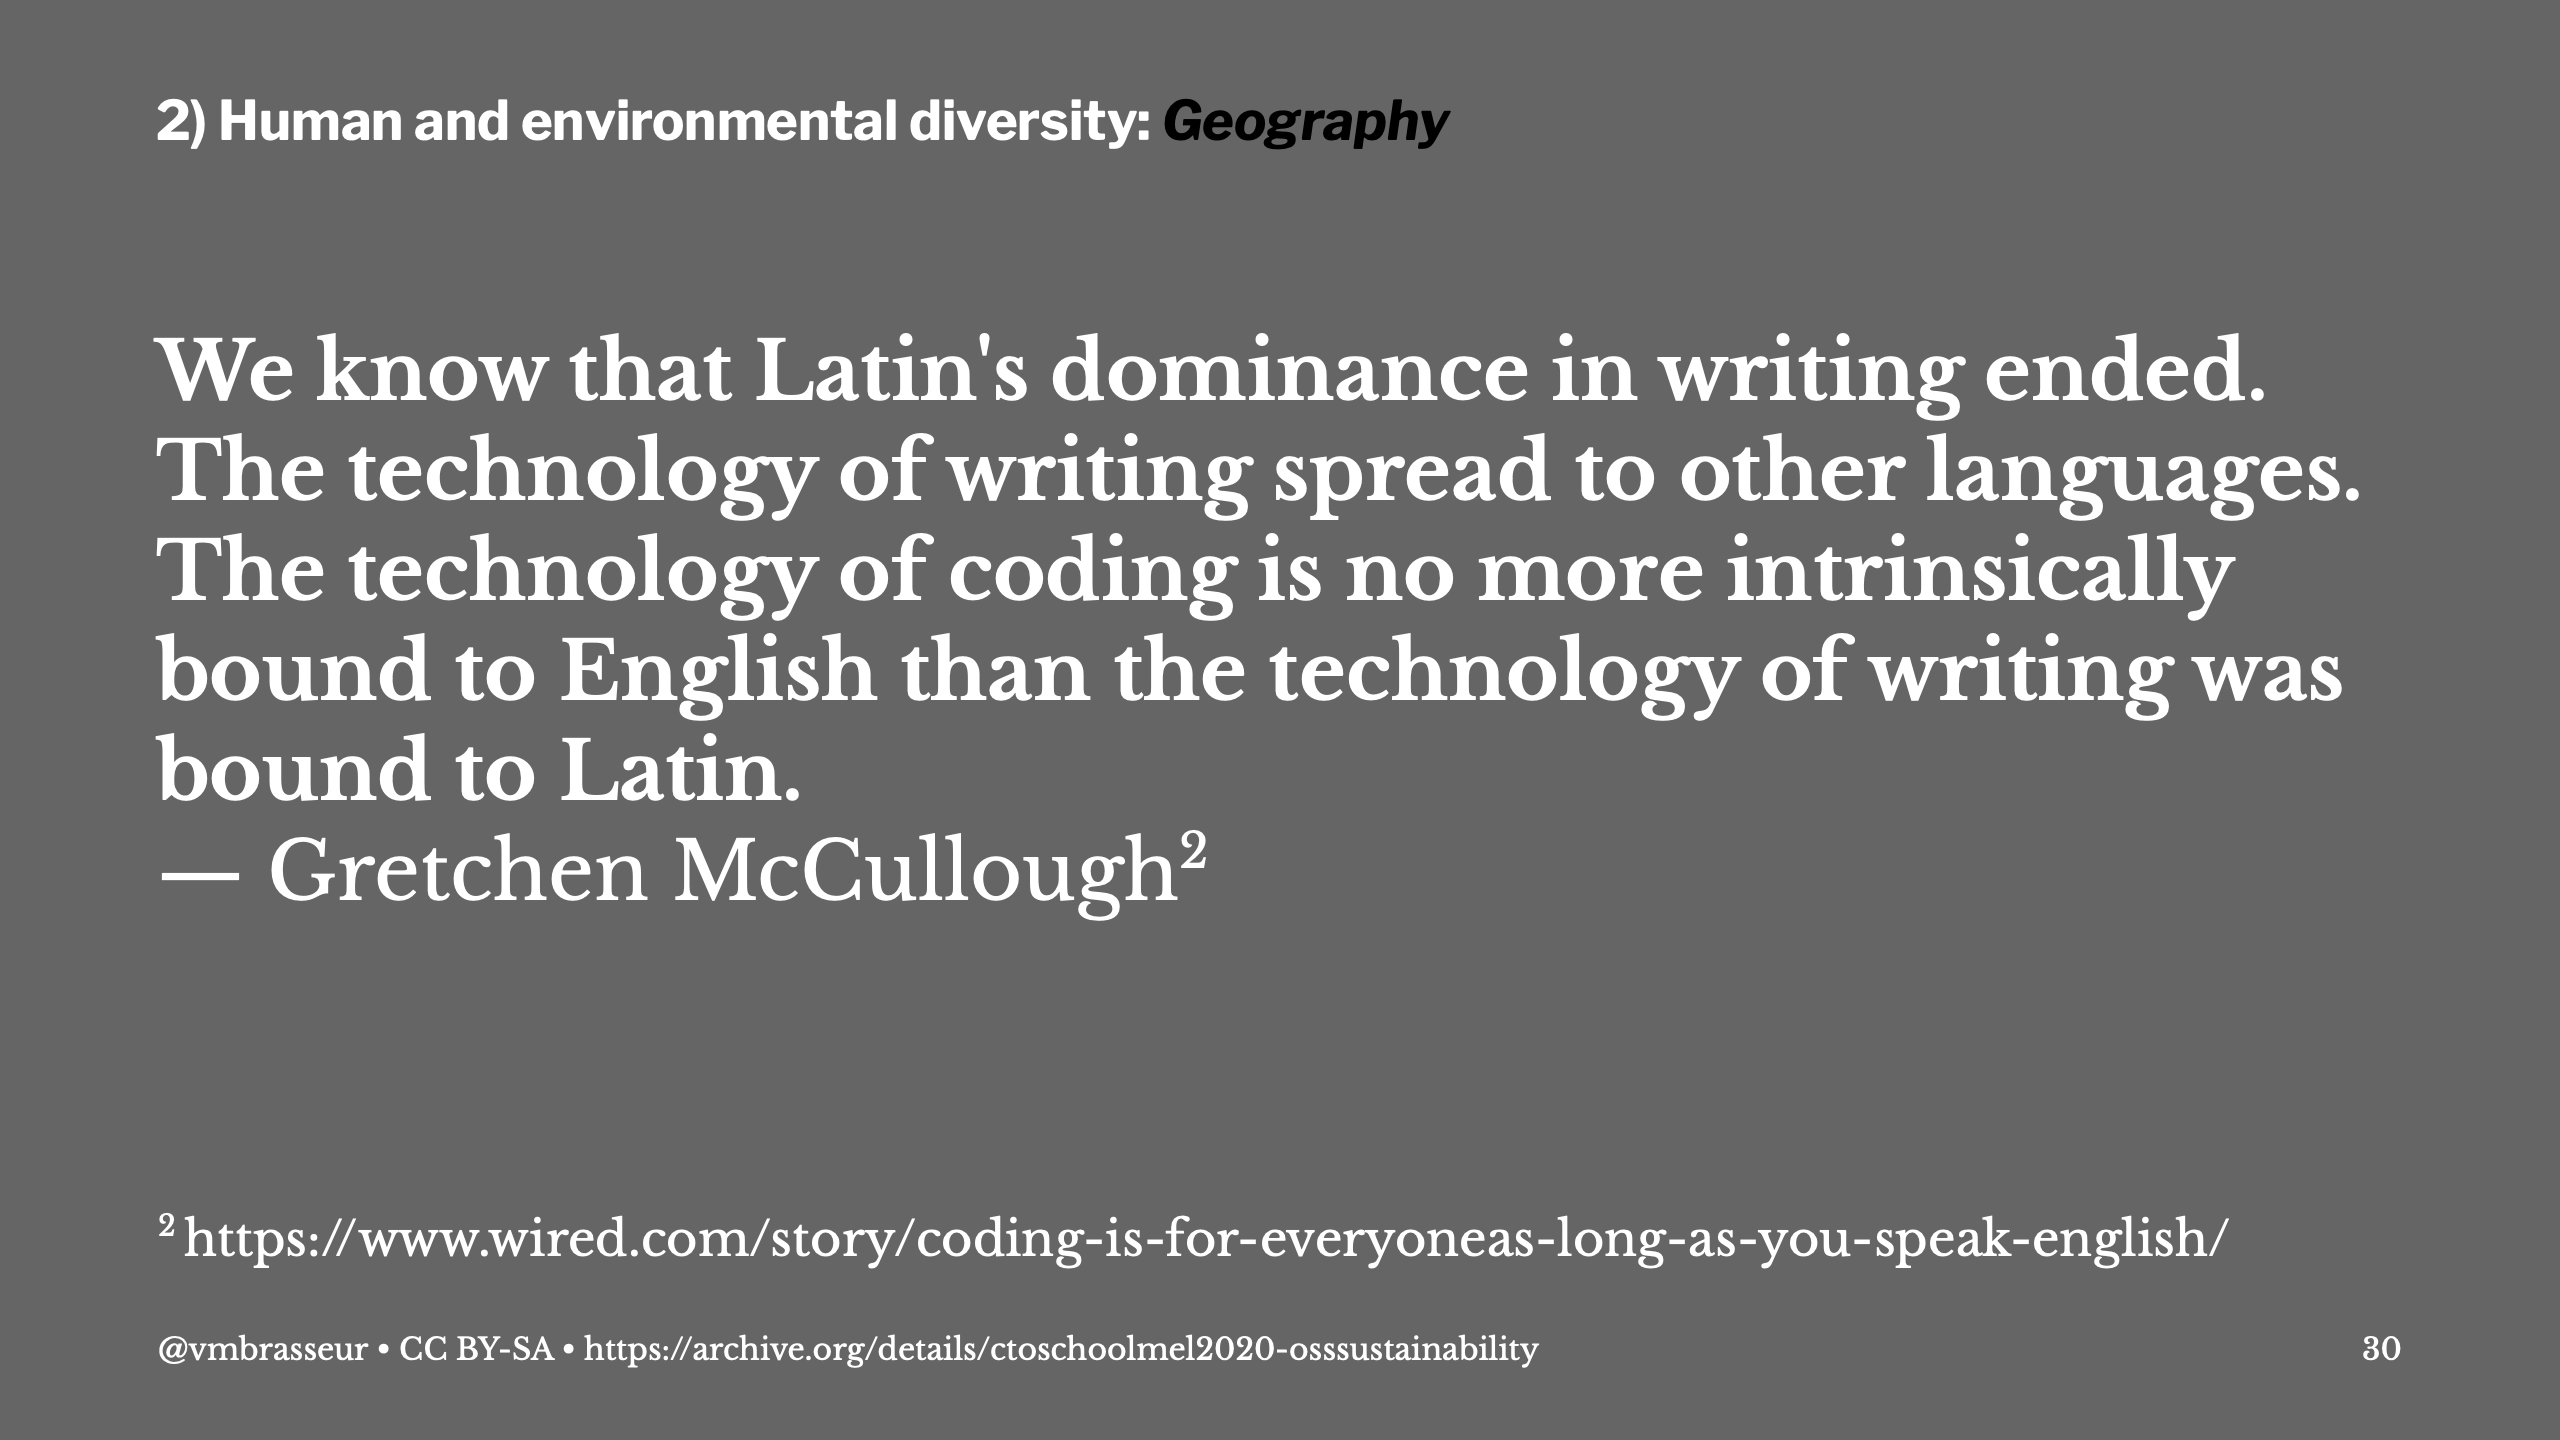 2) Human and environmental diversity: Geography. Quote from Gretchen McCullough: We know that Latin's dominance in writing ended. The technology of writing spread to other languages. The technology of coding is no more intrinsically bound to English than the technology of writing was bound to Latin.